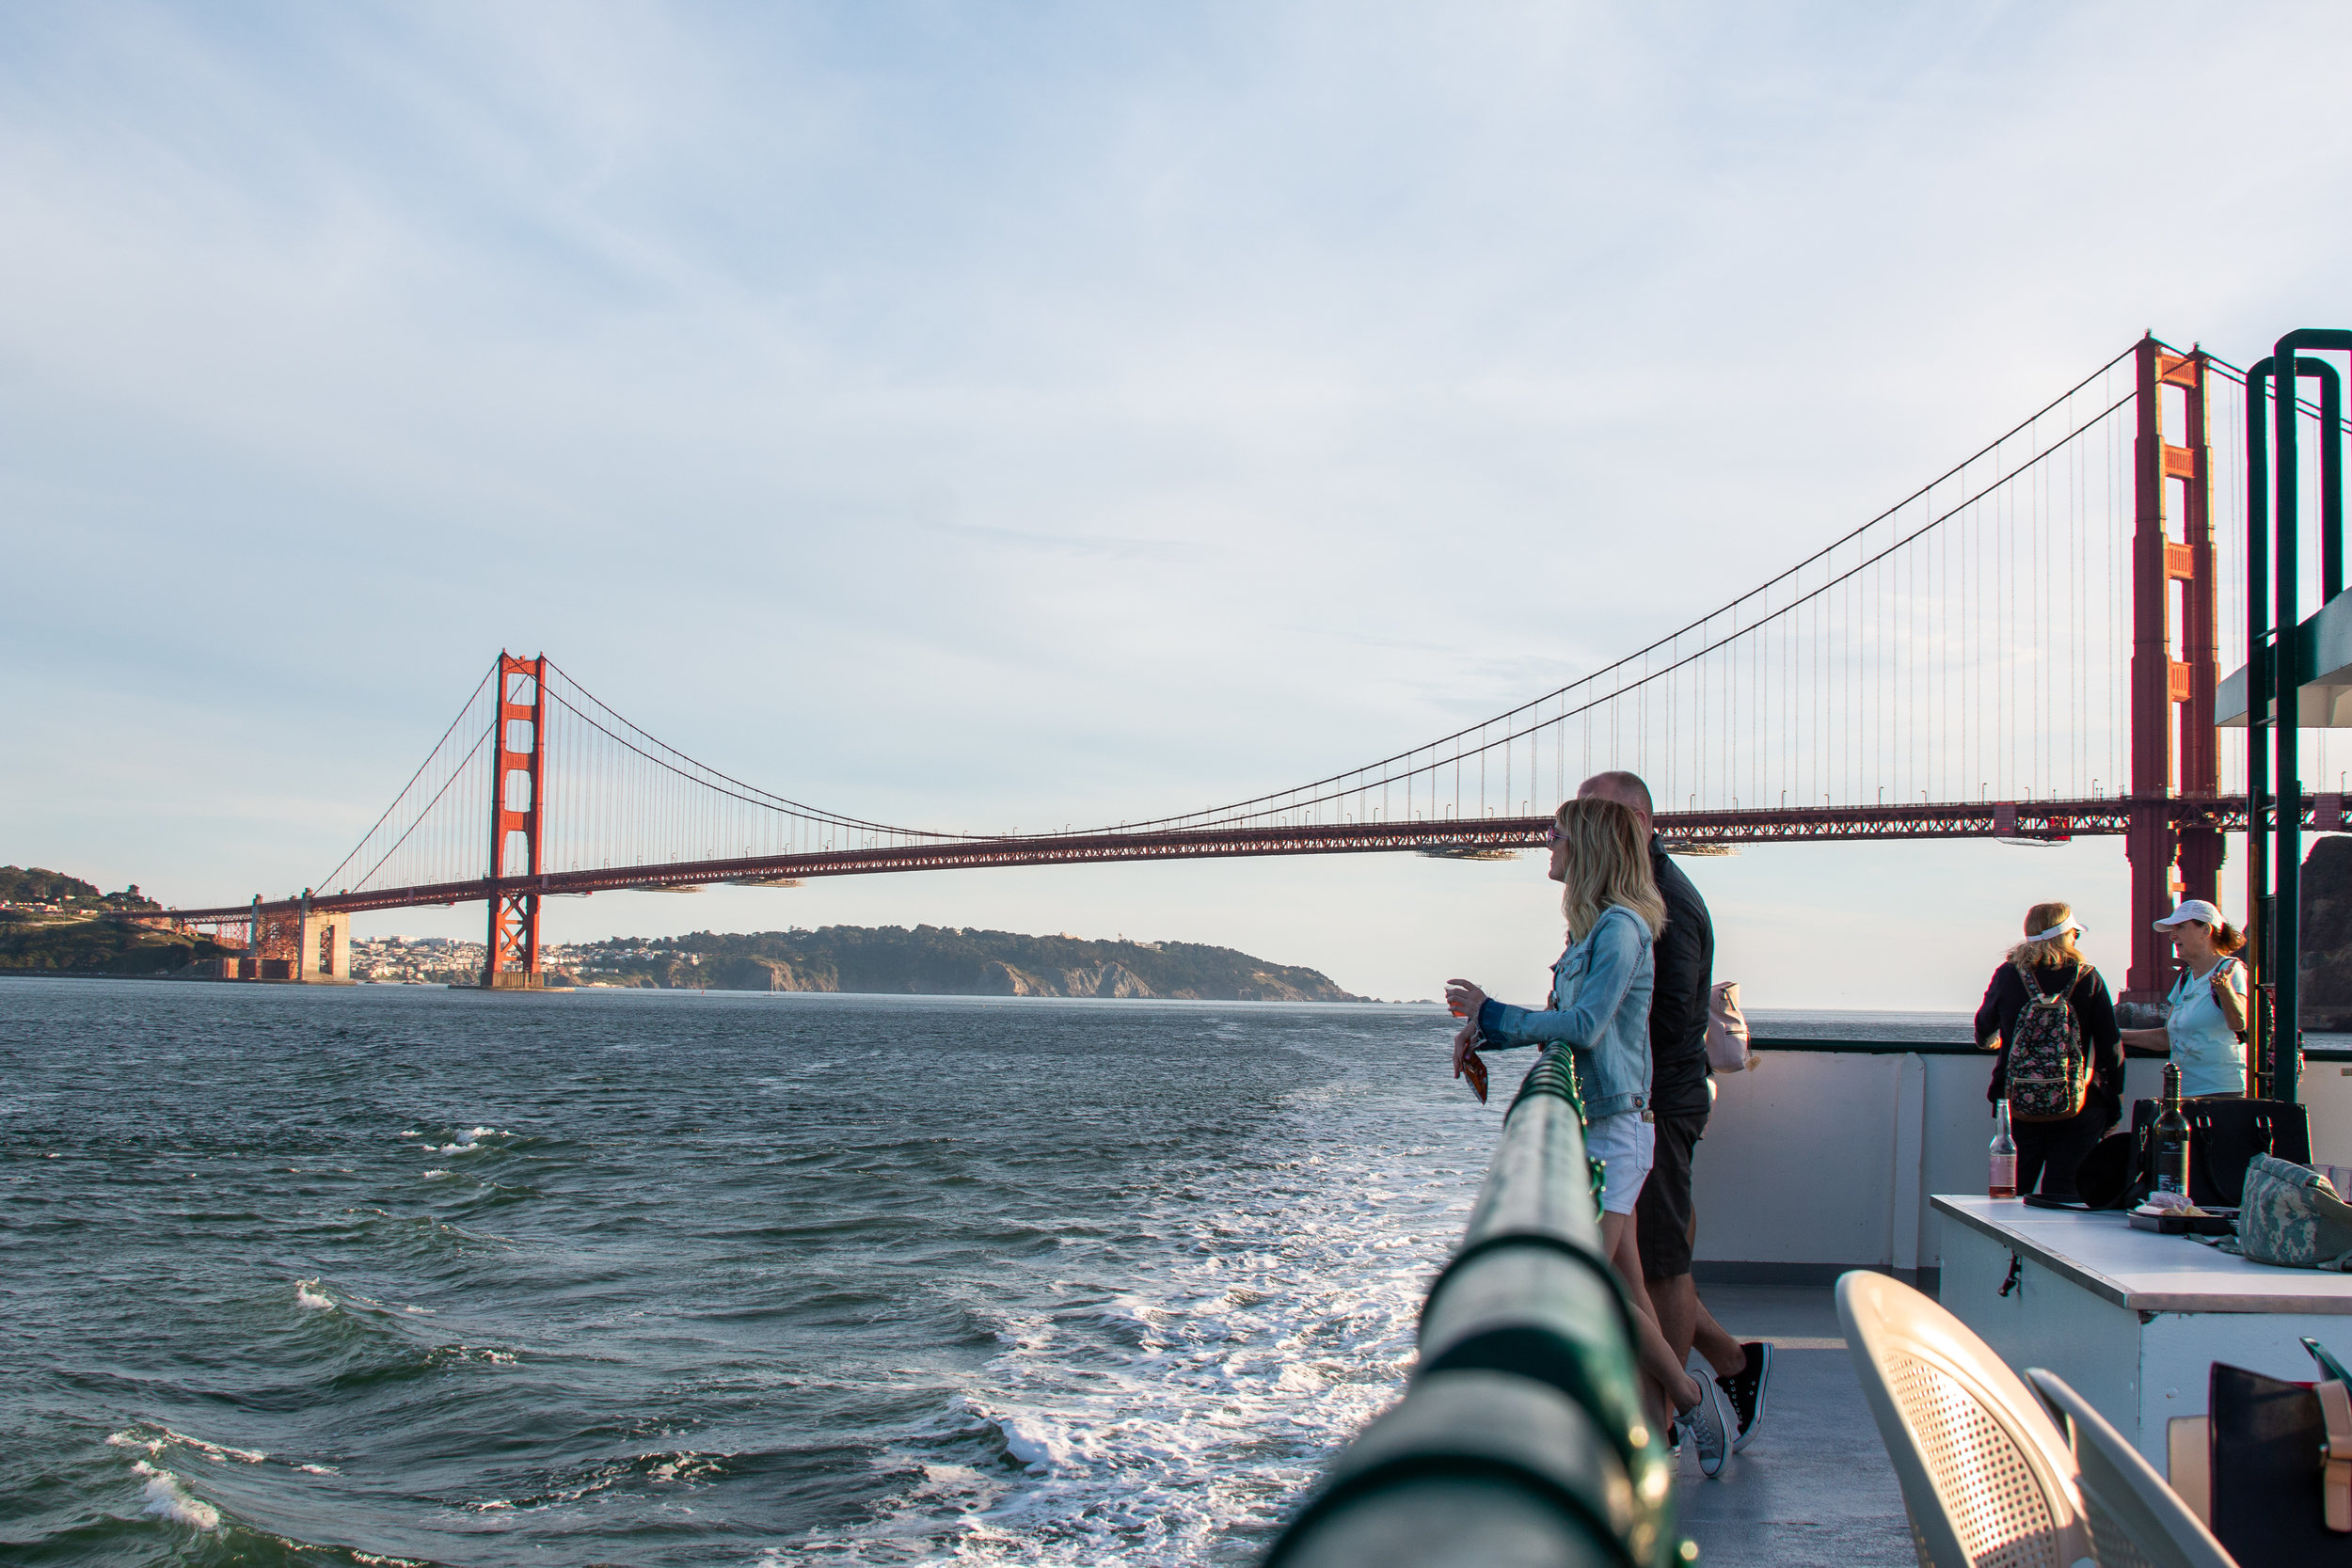 San Francisco Bay Cruise: A Special Offer For Our Guests!